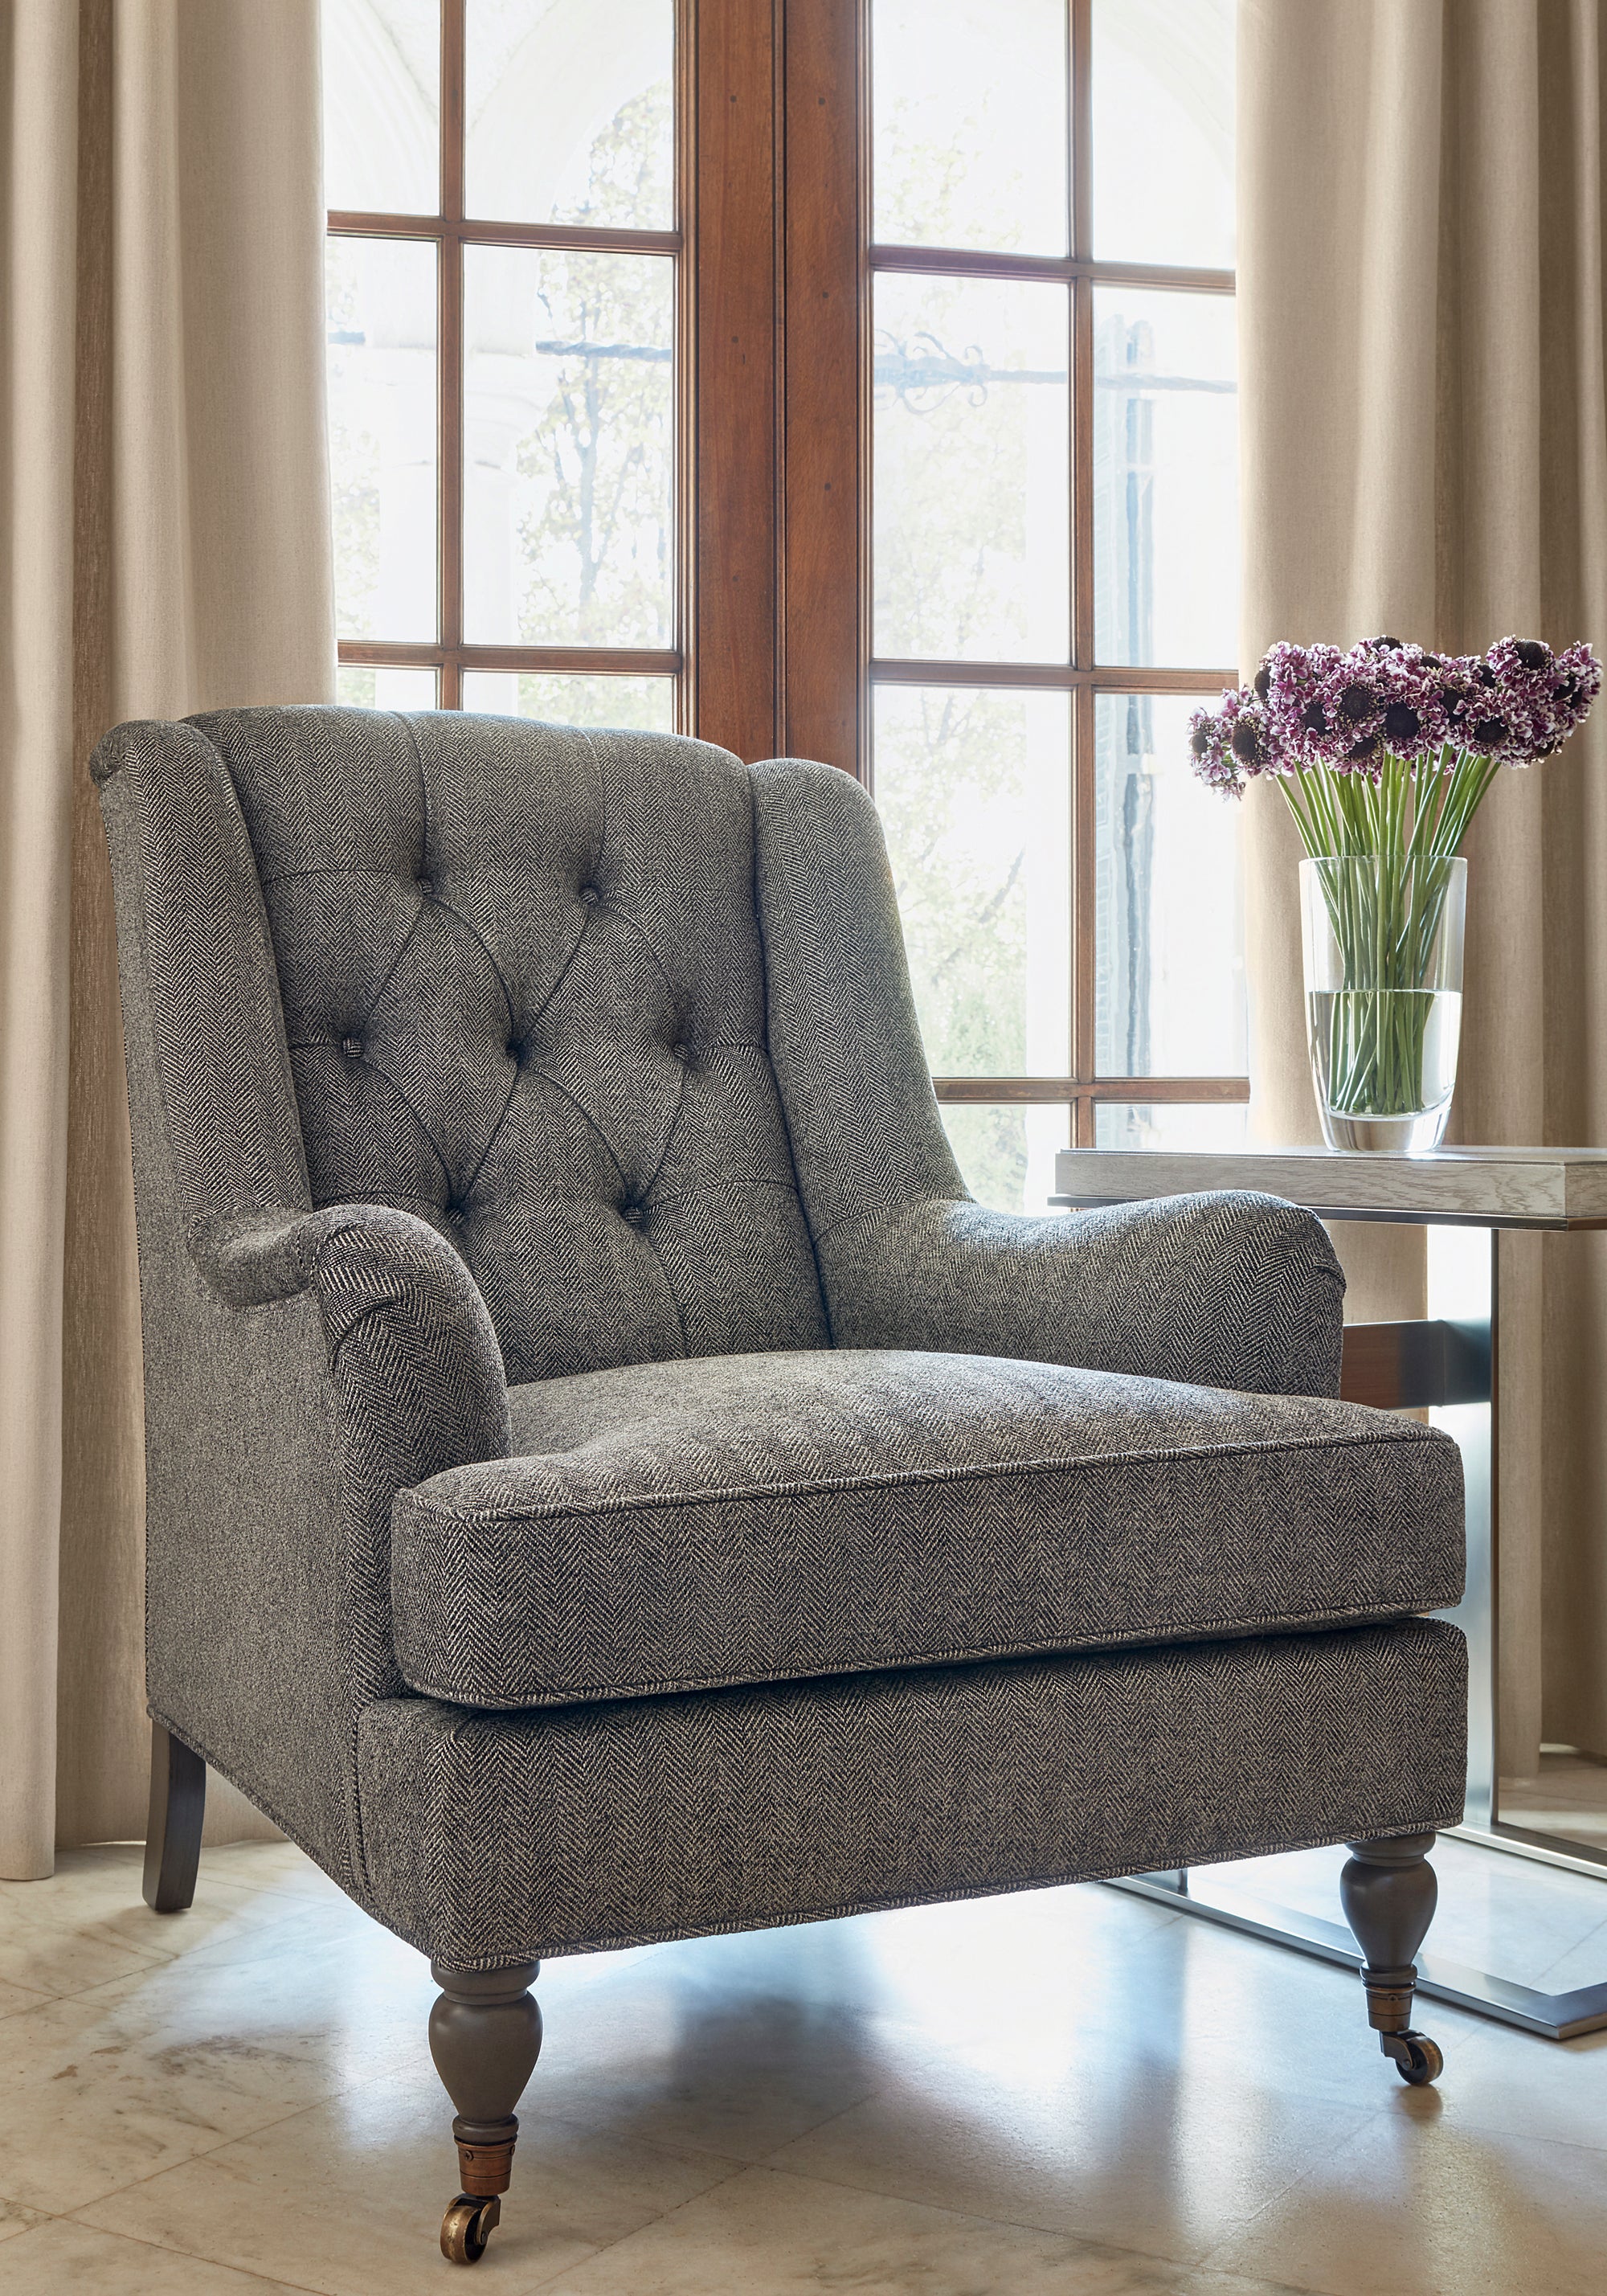 Newport Wing Chair in Hadrian Herringbone woven fabric in charcoal color - pattern number W80713 - by Thibaut in the Woven Resource Vol 11 Rialto collection